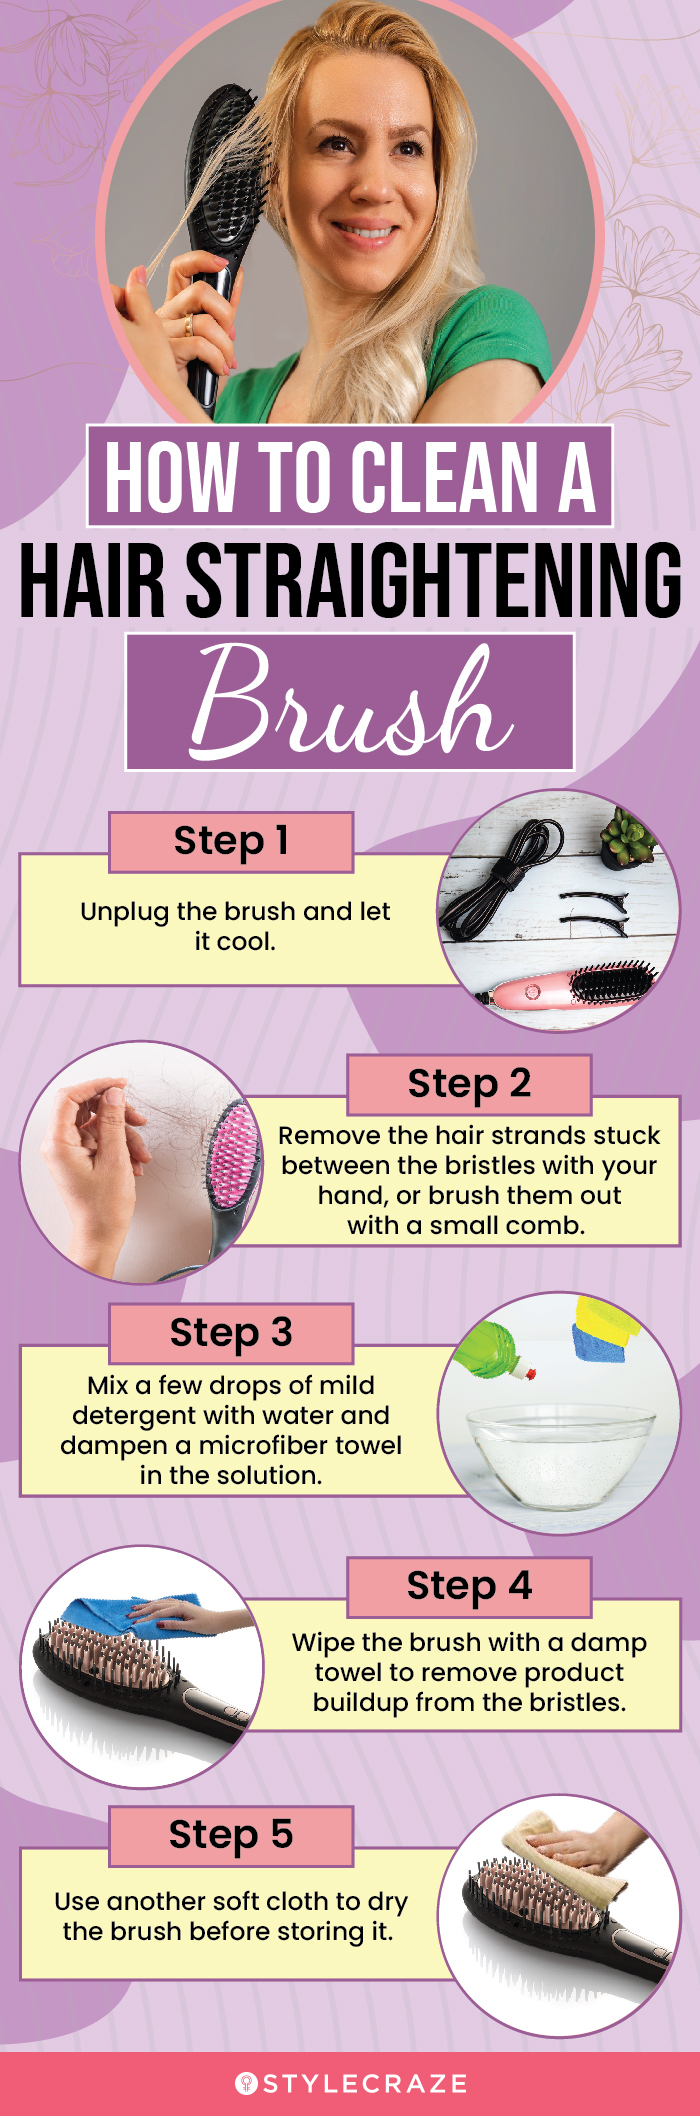 Tips To Clean A Hair Straightening Brush: Steps To Follow (infographic)